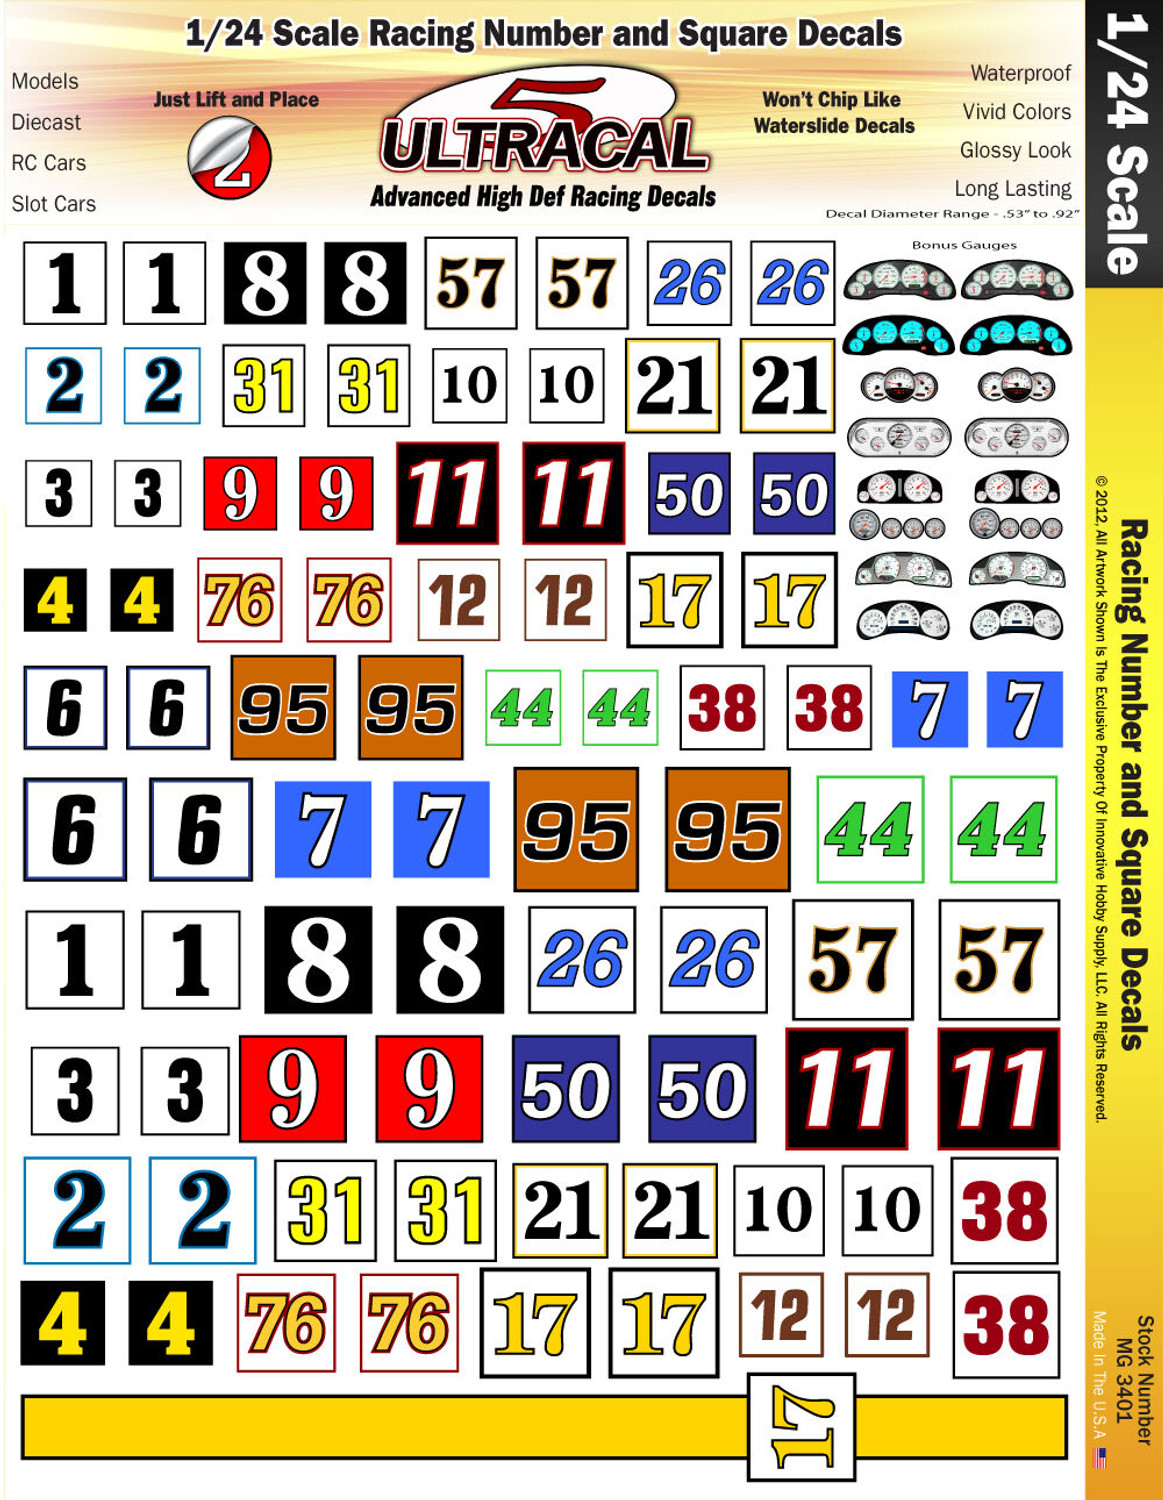 MG 3401 Utracal High Definition Racing Decals - Racing Numbers and Squares for 1:24 scale